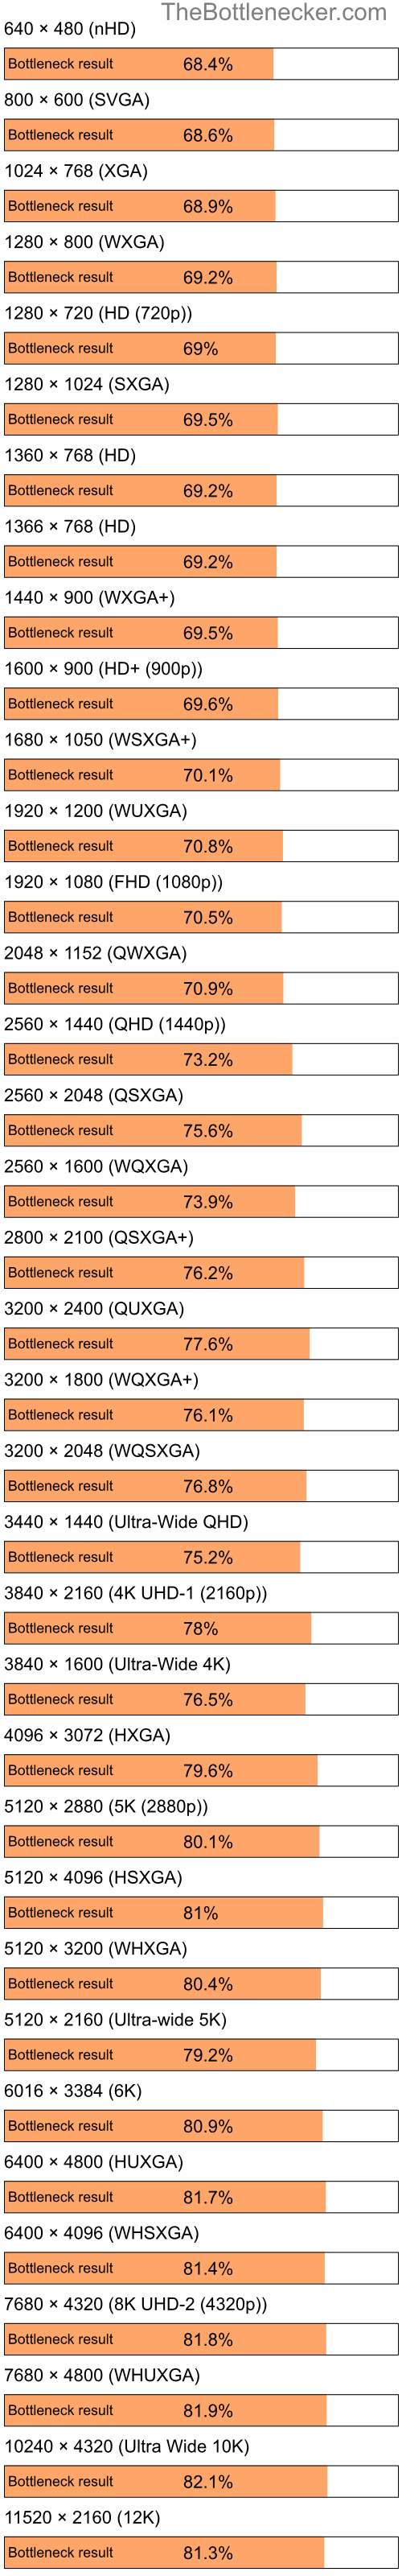 Bottleneck results by resolution for Intel Pentium 4 and AMD Radeon HD 4270 in Graphic Card Intense Tasks